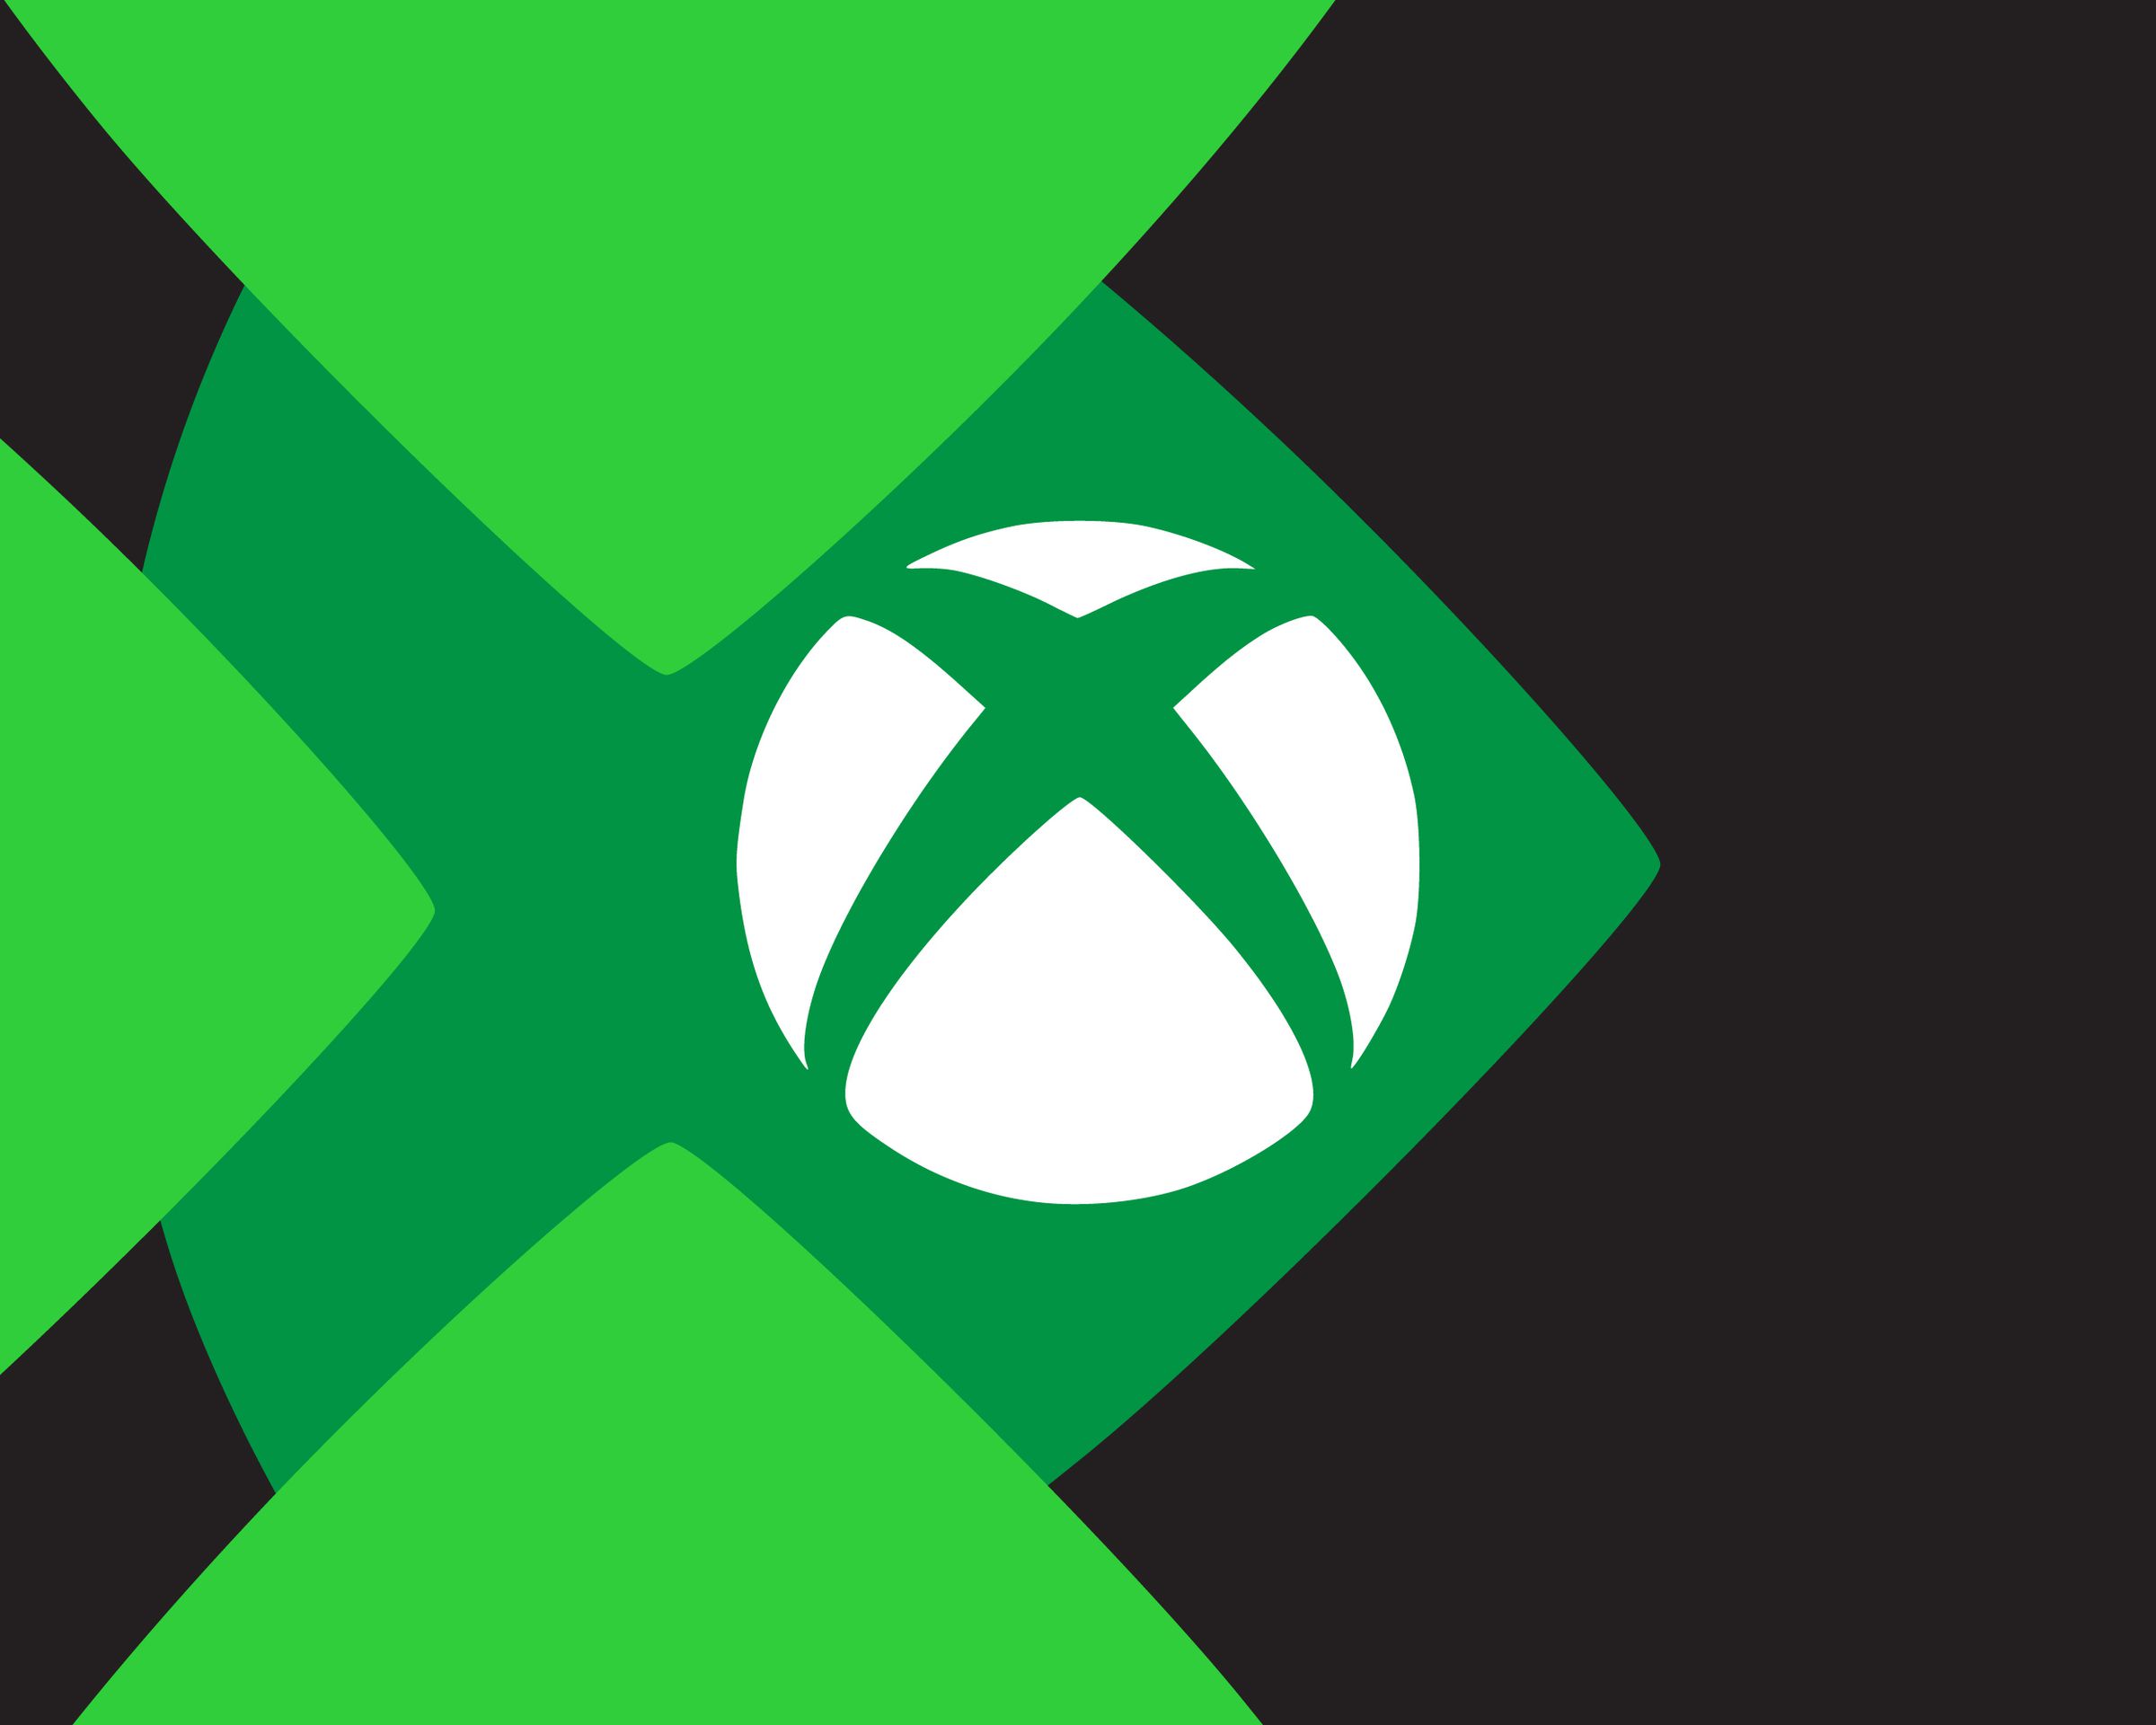 The Microsoft Xbox game logo against a green and black background.